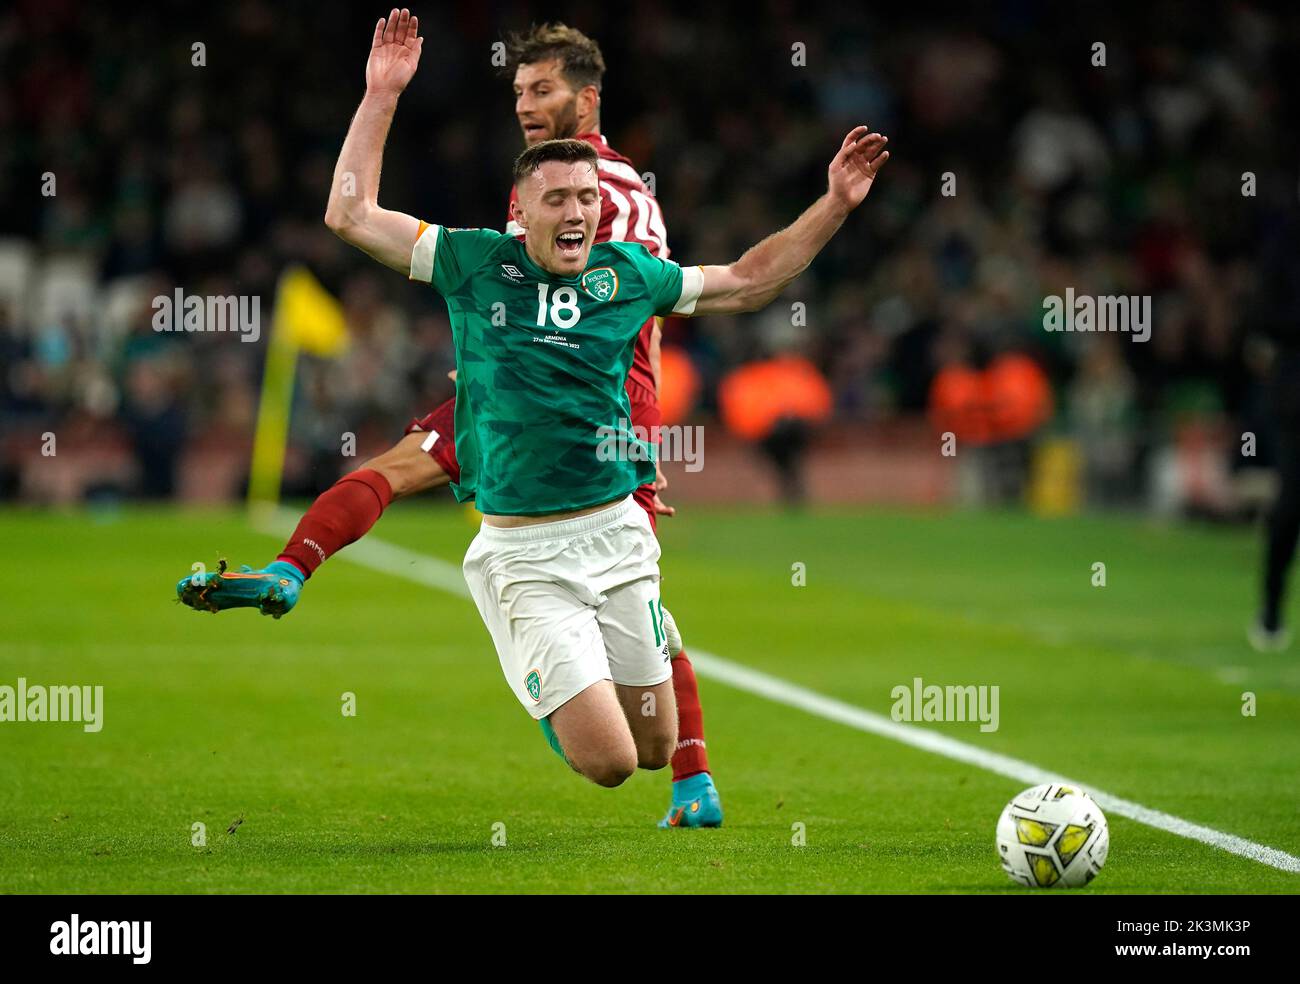 Republic of Ireland's Dara O'Shea is fouled by Armenia's Hovhannes Harutyunyan during the UEFA Nations League match at the Aviva Stadium in Dublin, Ireland. Picture date: Tuesday September 27, 2022. Stock Photo